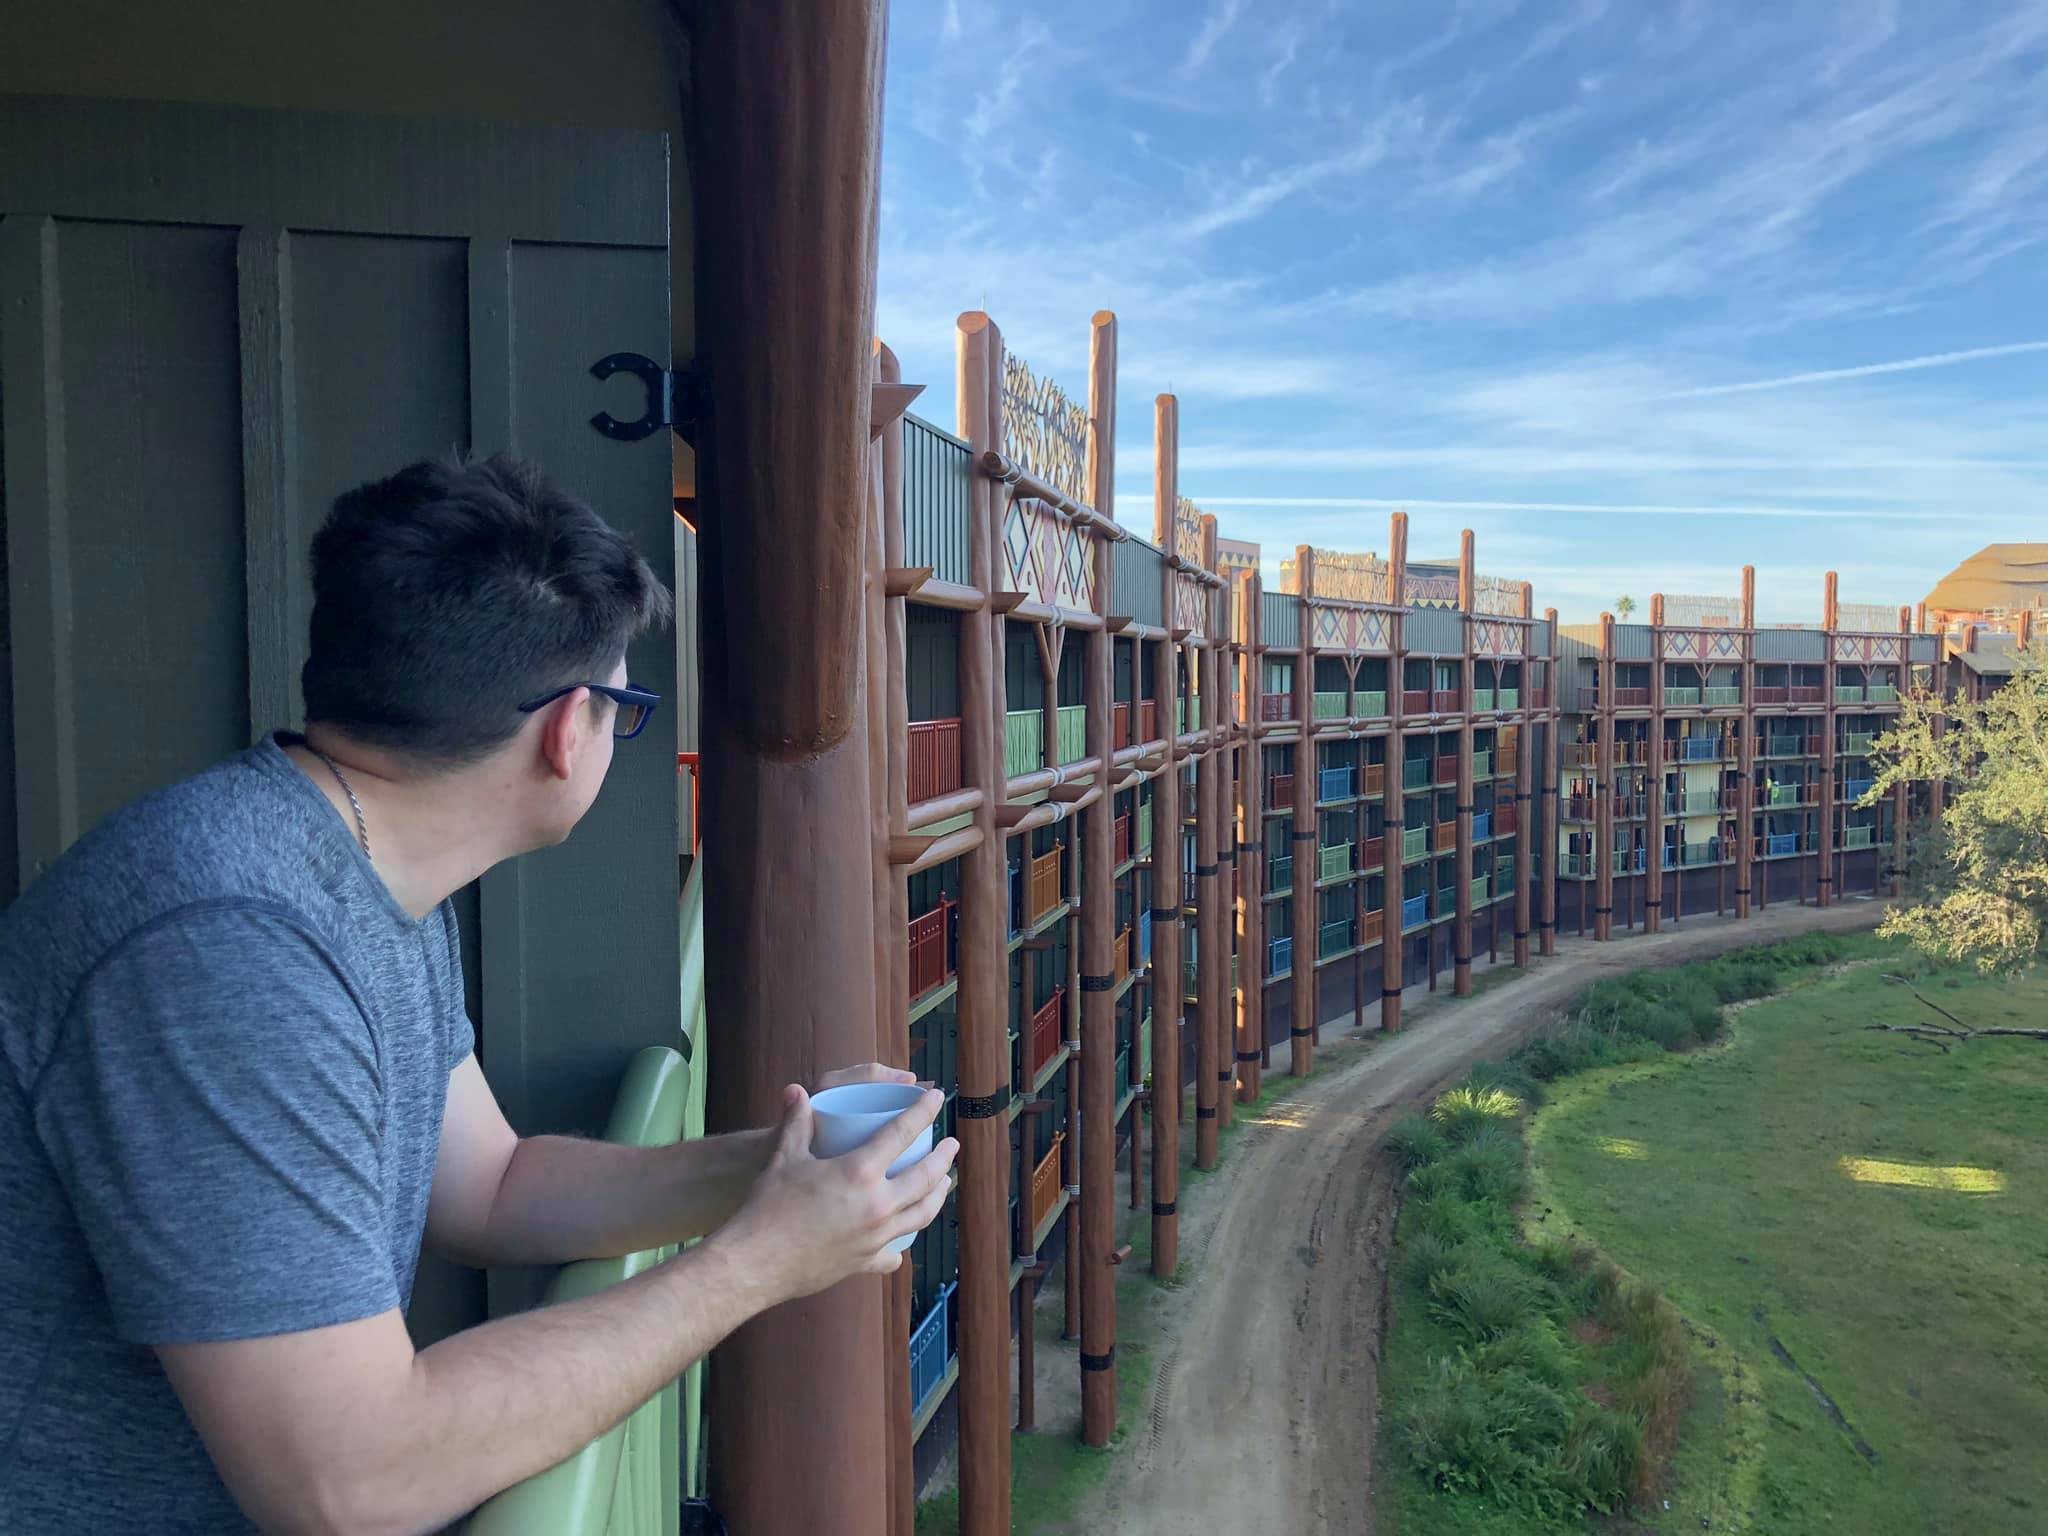 Animal Kingdom Villas | A Man Holding a Cup Of Coffee At the Balcony